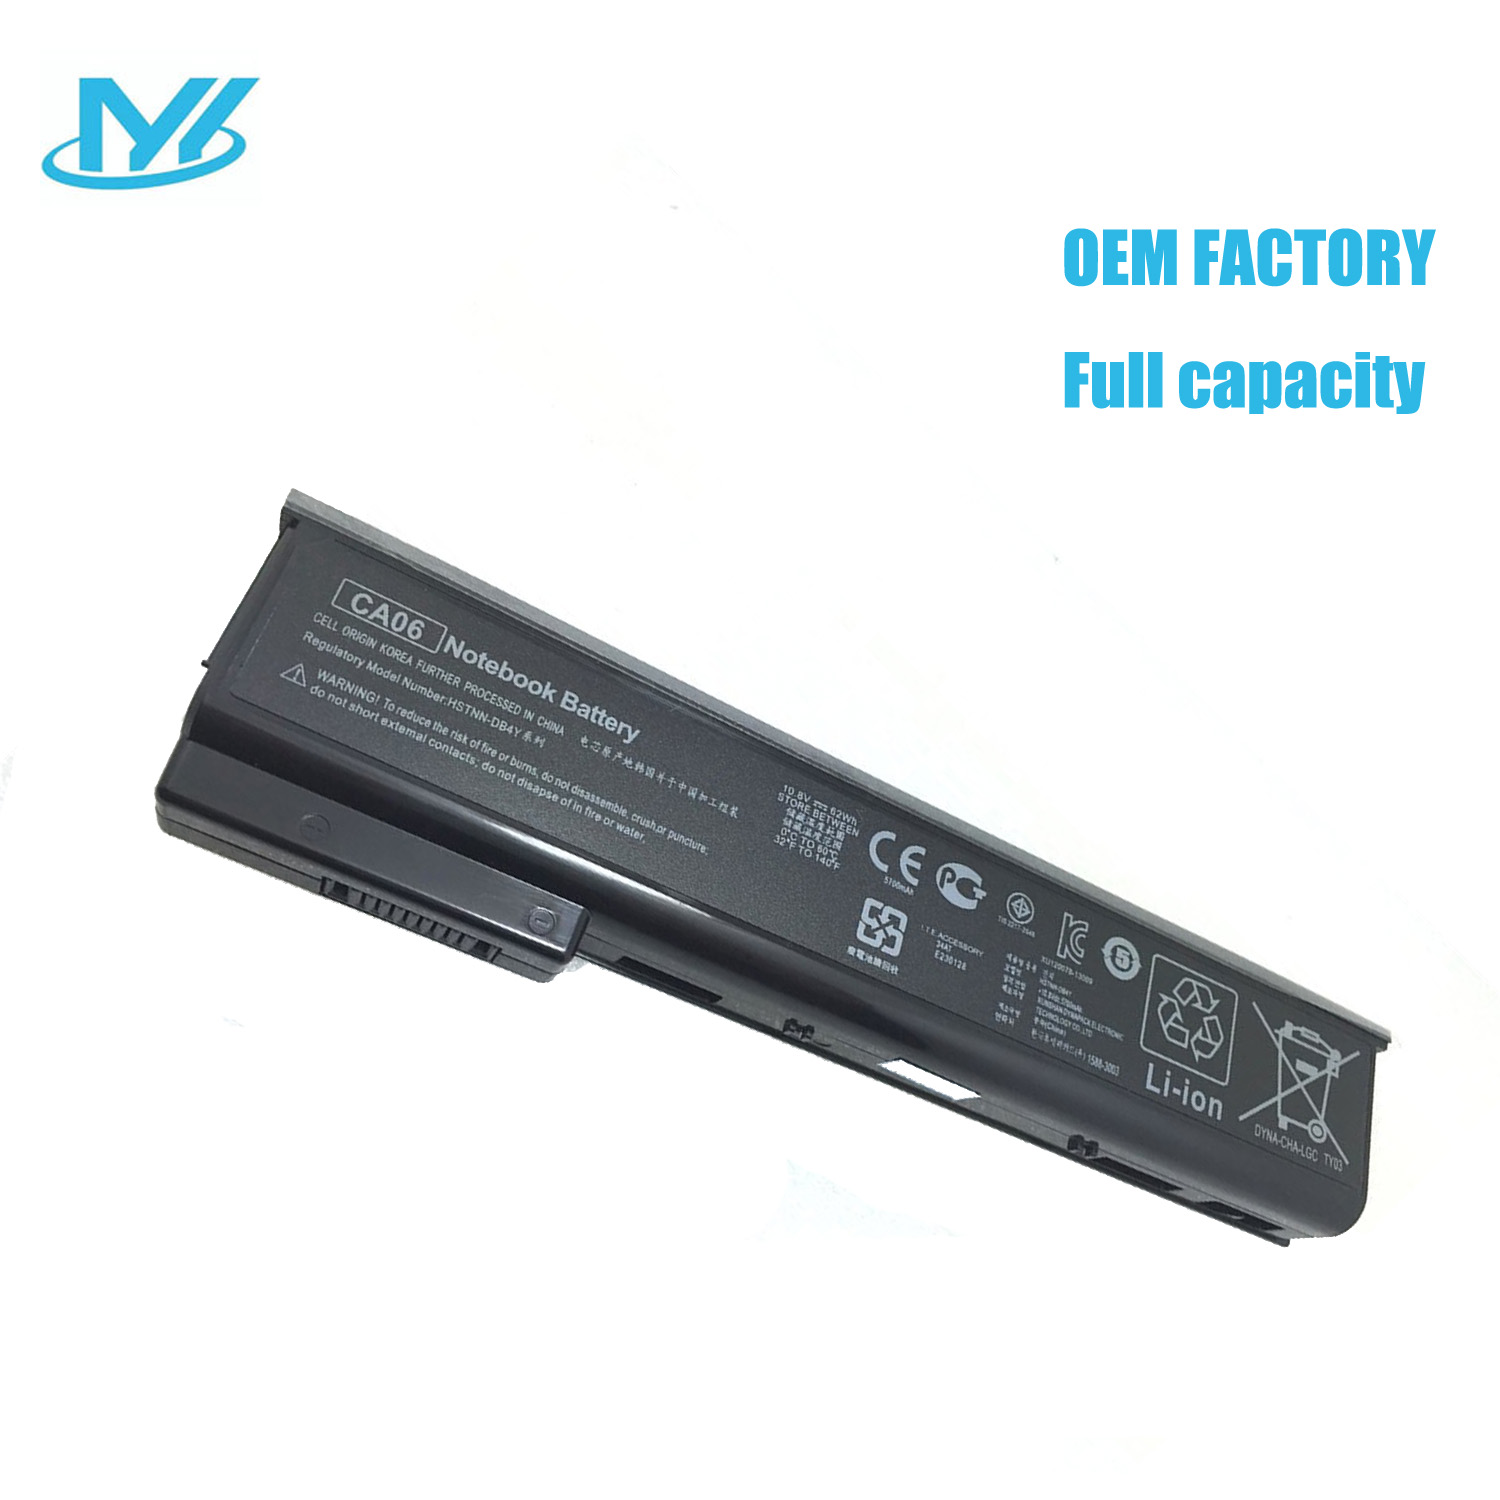 CA06 rechargeable lithium ion Notebook battery Laptop battery CA06XL CA09 10.8V 62Wh for HP laptop ProBook 640 645 650 655 G0 G1 series